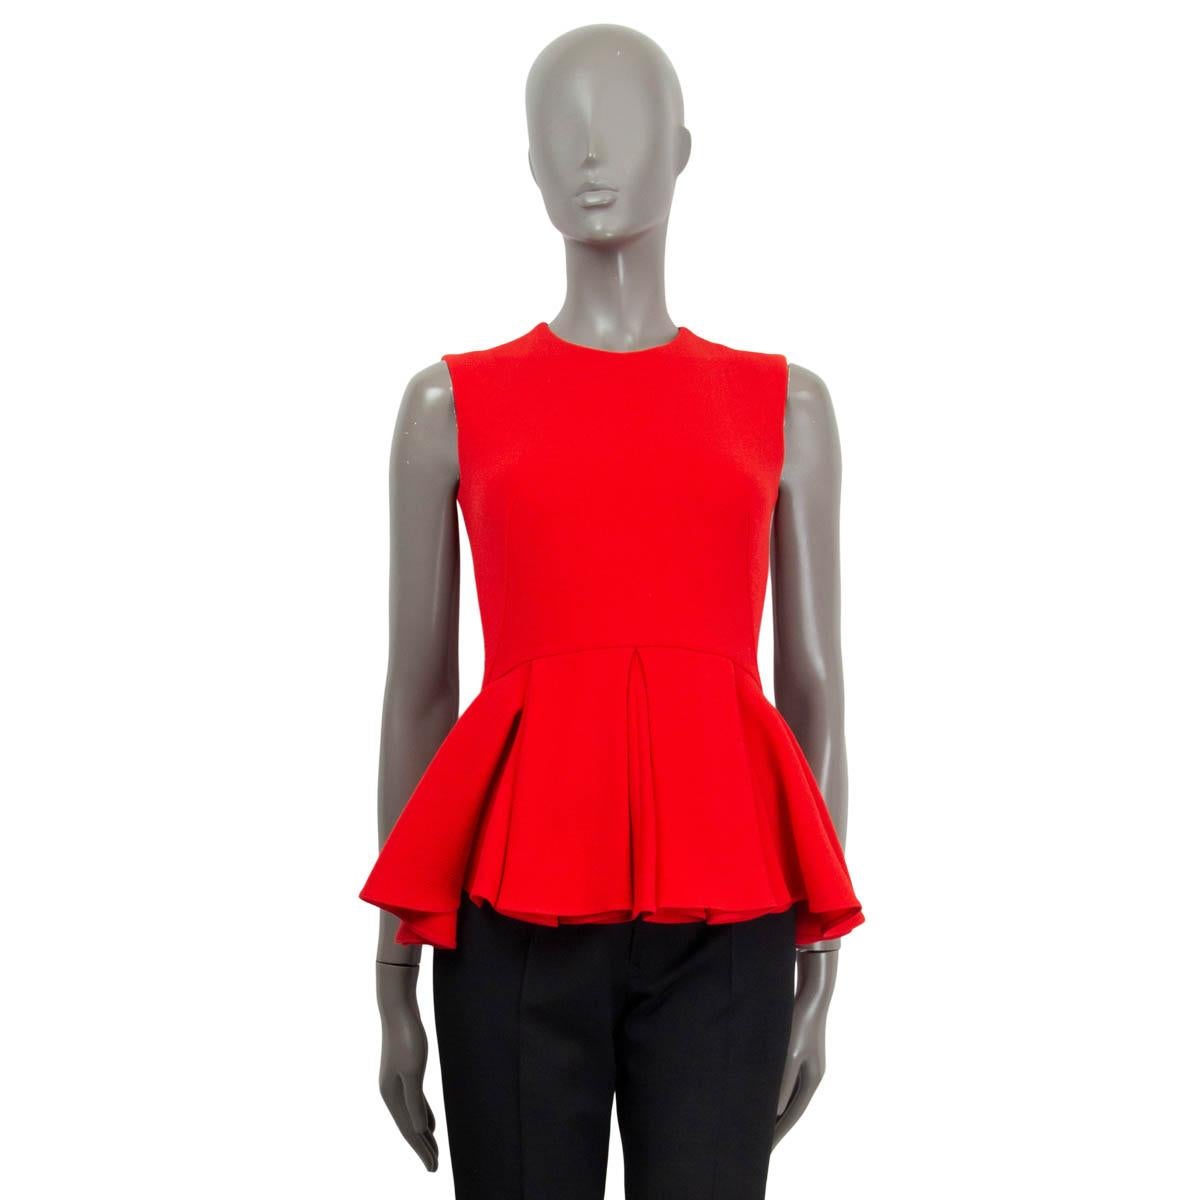 100% authentic Christian Dior sleeveless flared top in red virgin wool (100%). Opens with a zipper and a hook at the back. Lined in red silk (100%). Shows some faint deodorant stains at the inside armpits, otherwise in excellent